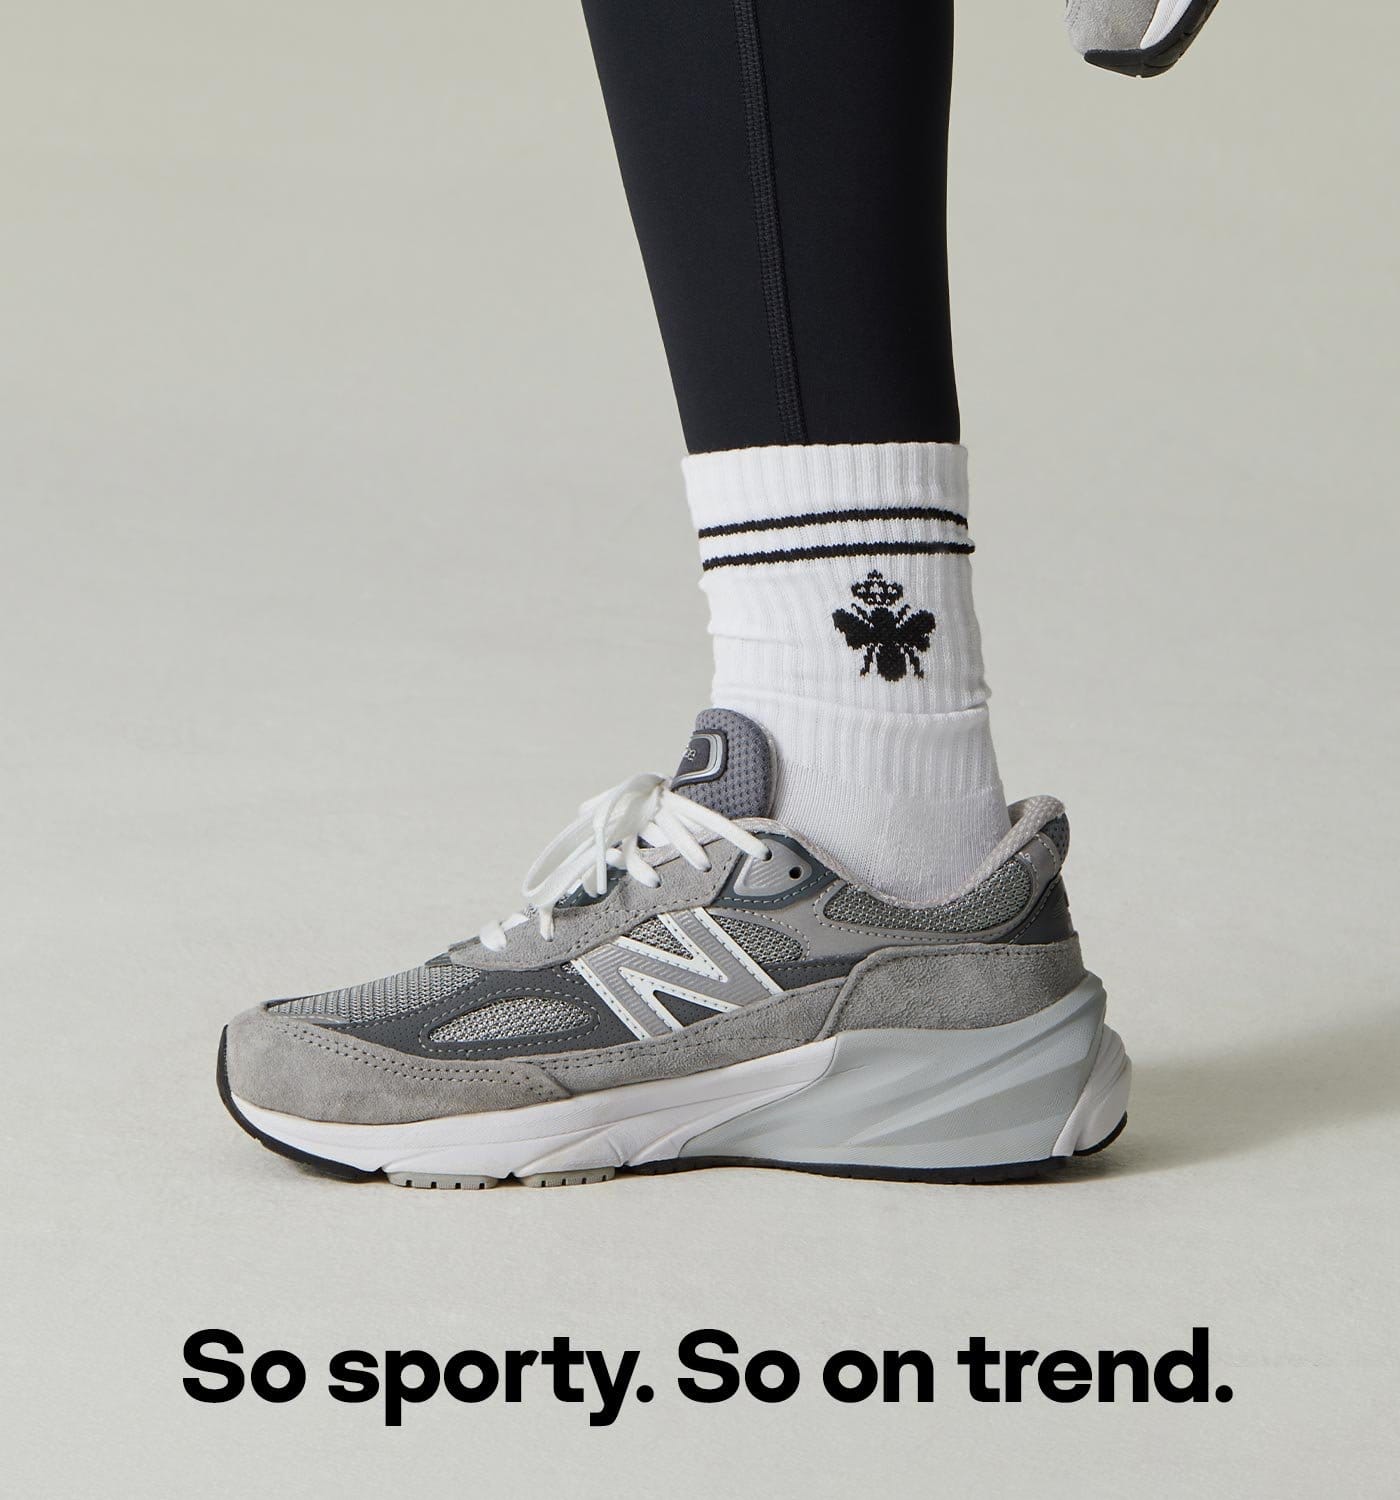 So sporty. So on trend.